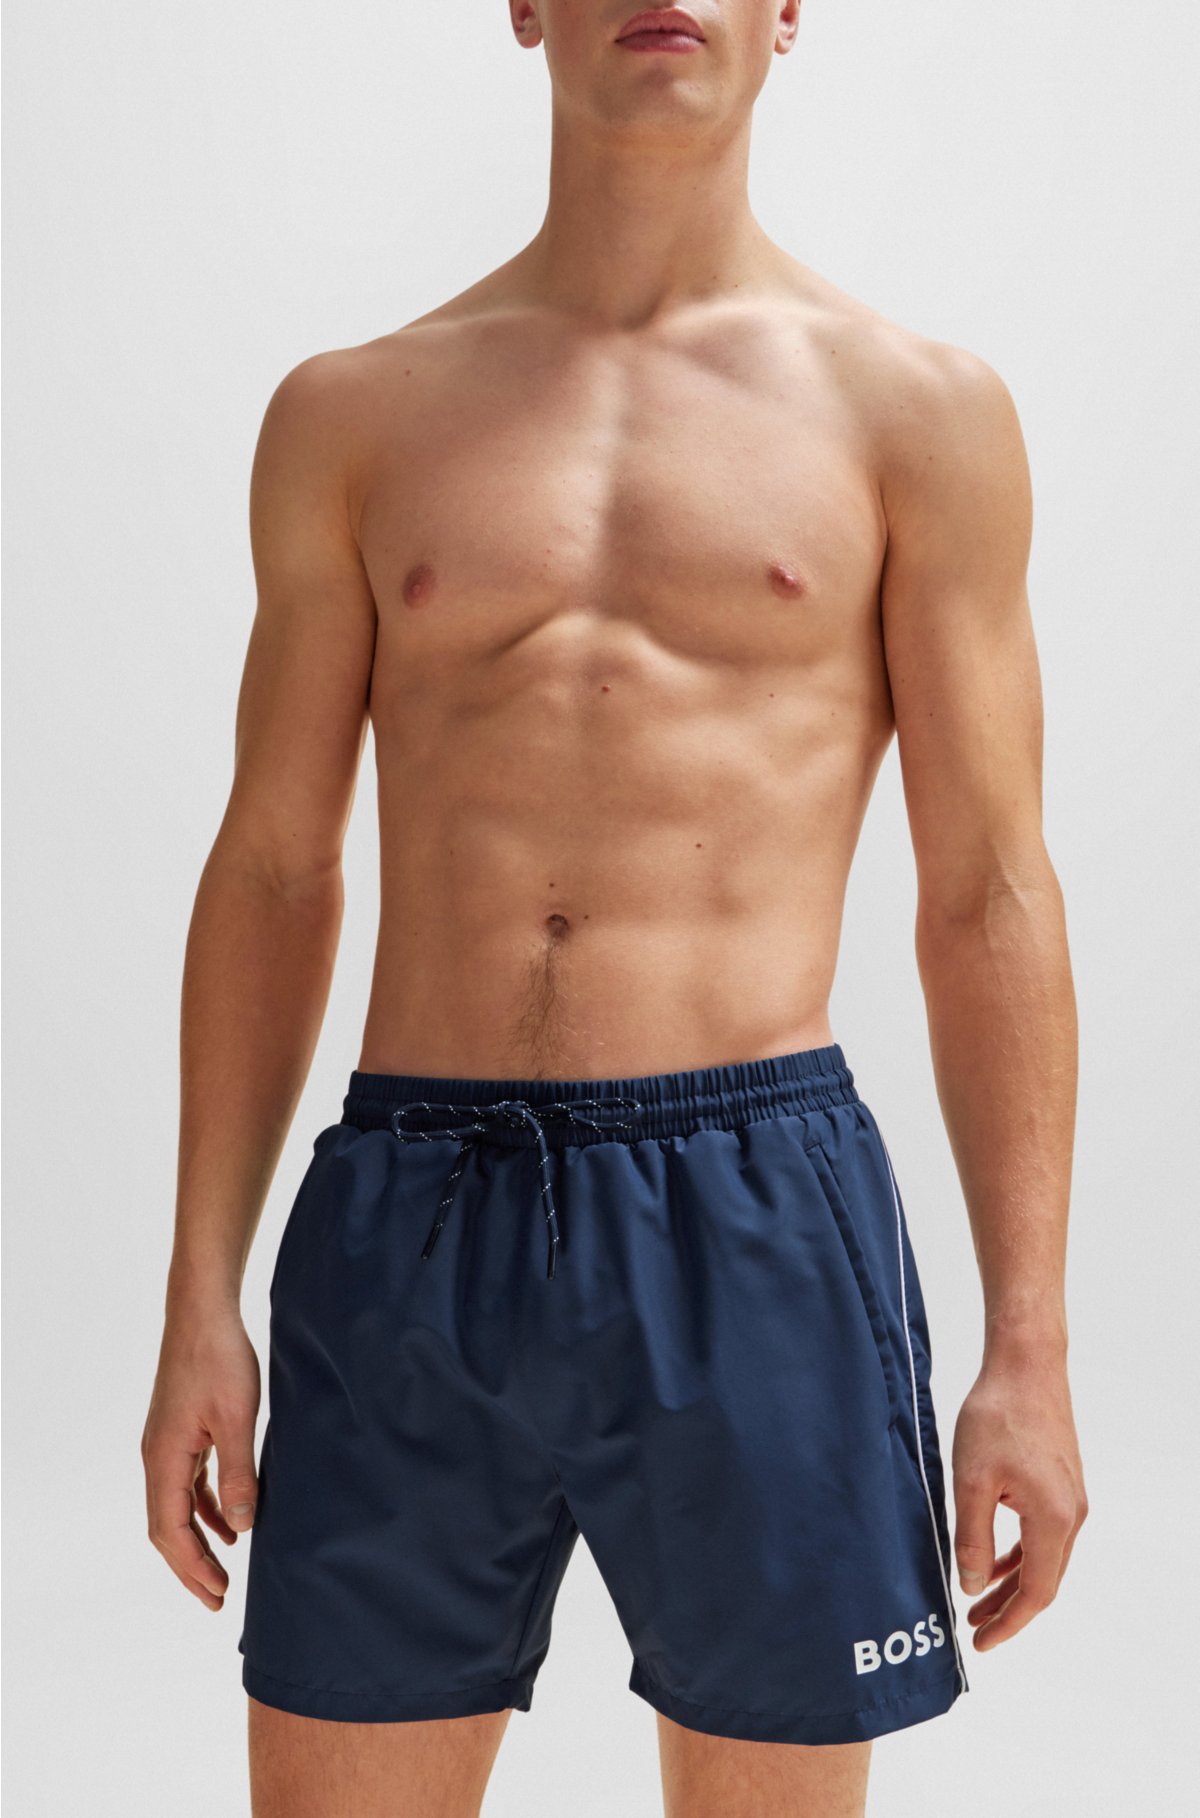 Quick-drying swim shorts with logo and piping, Dark Blue